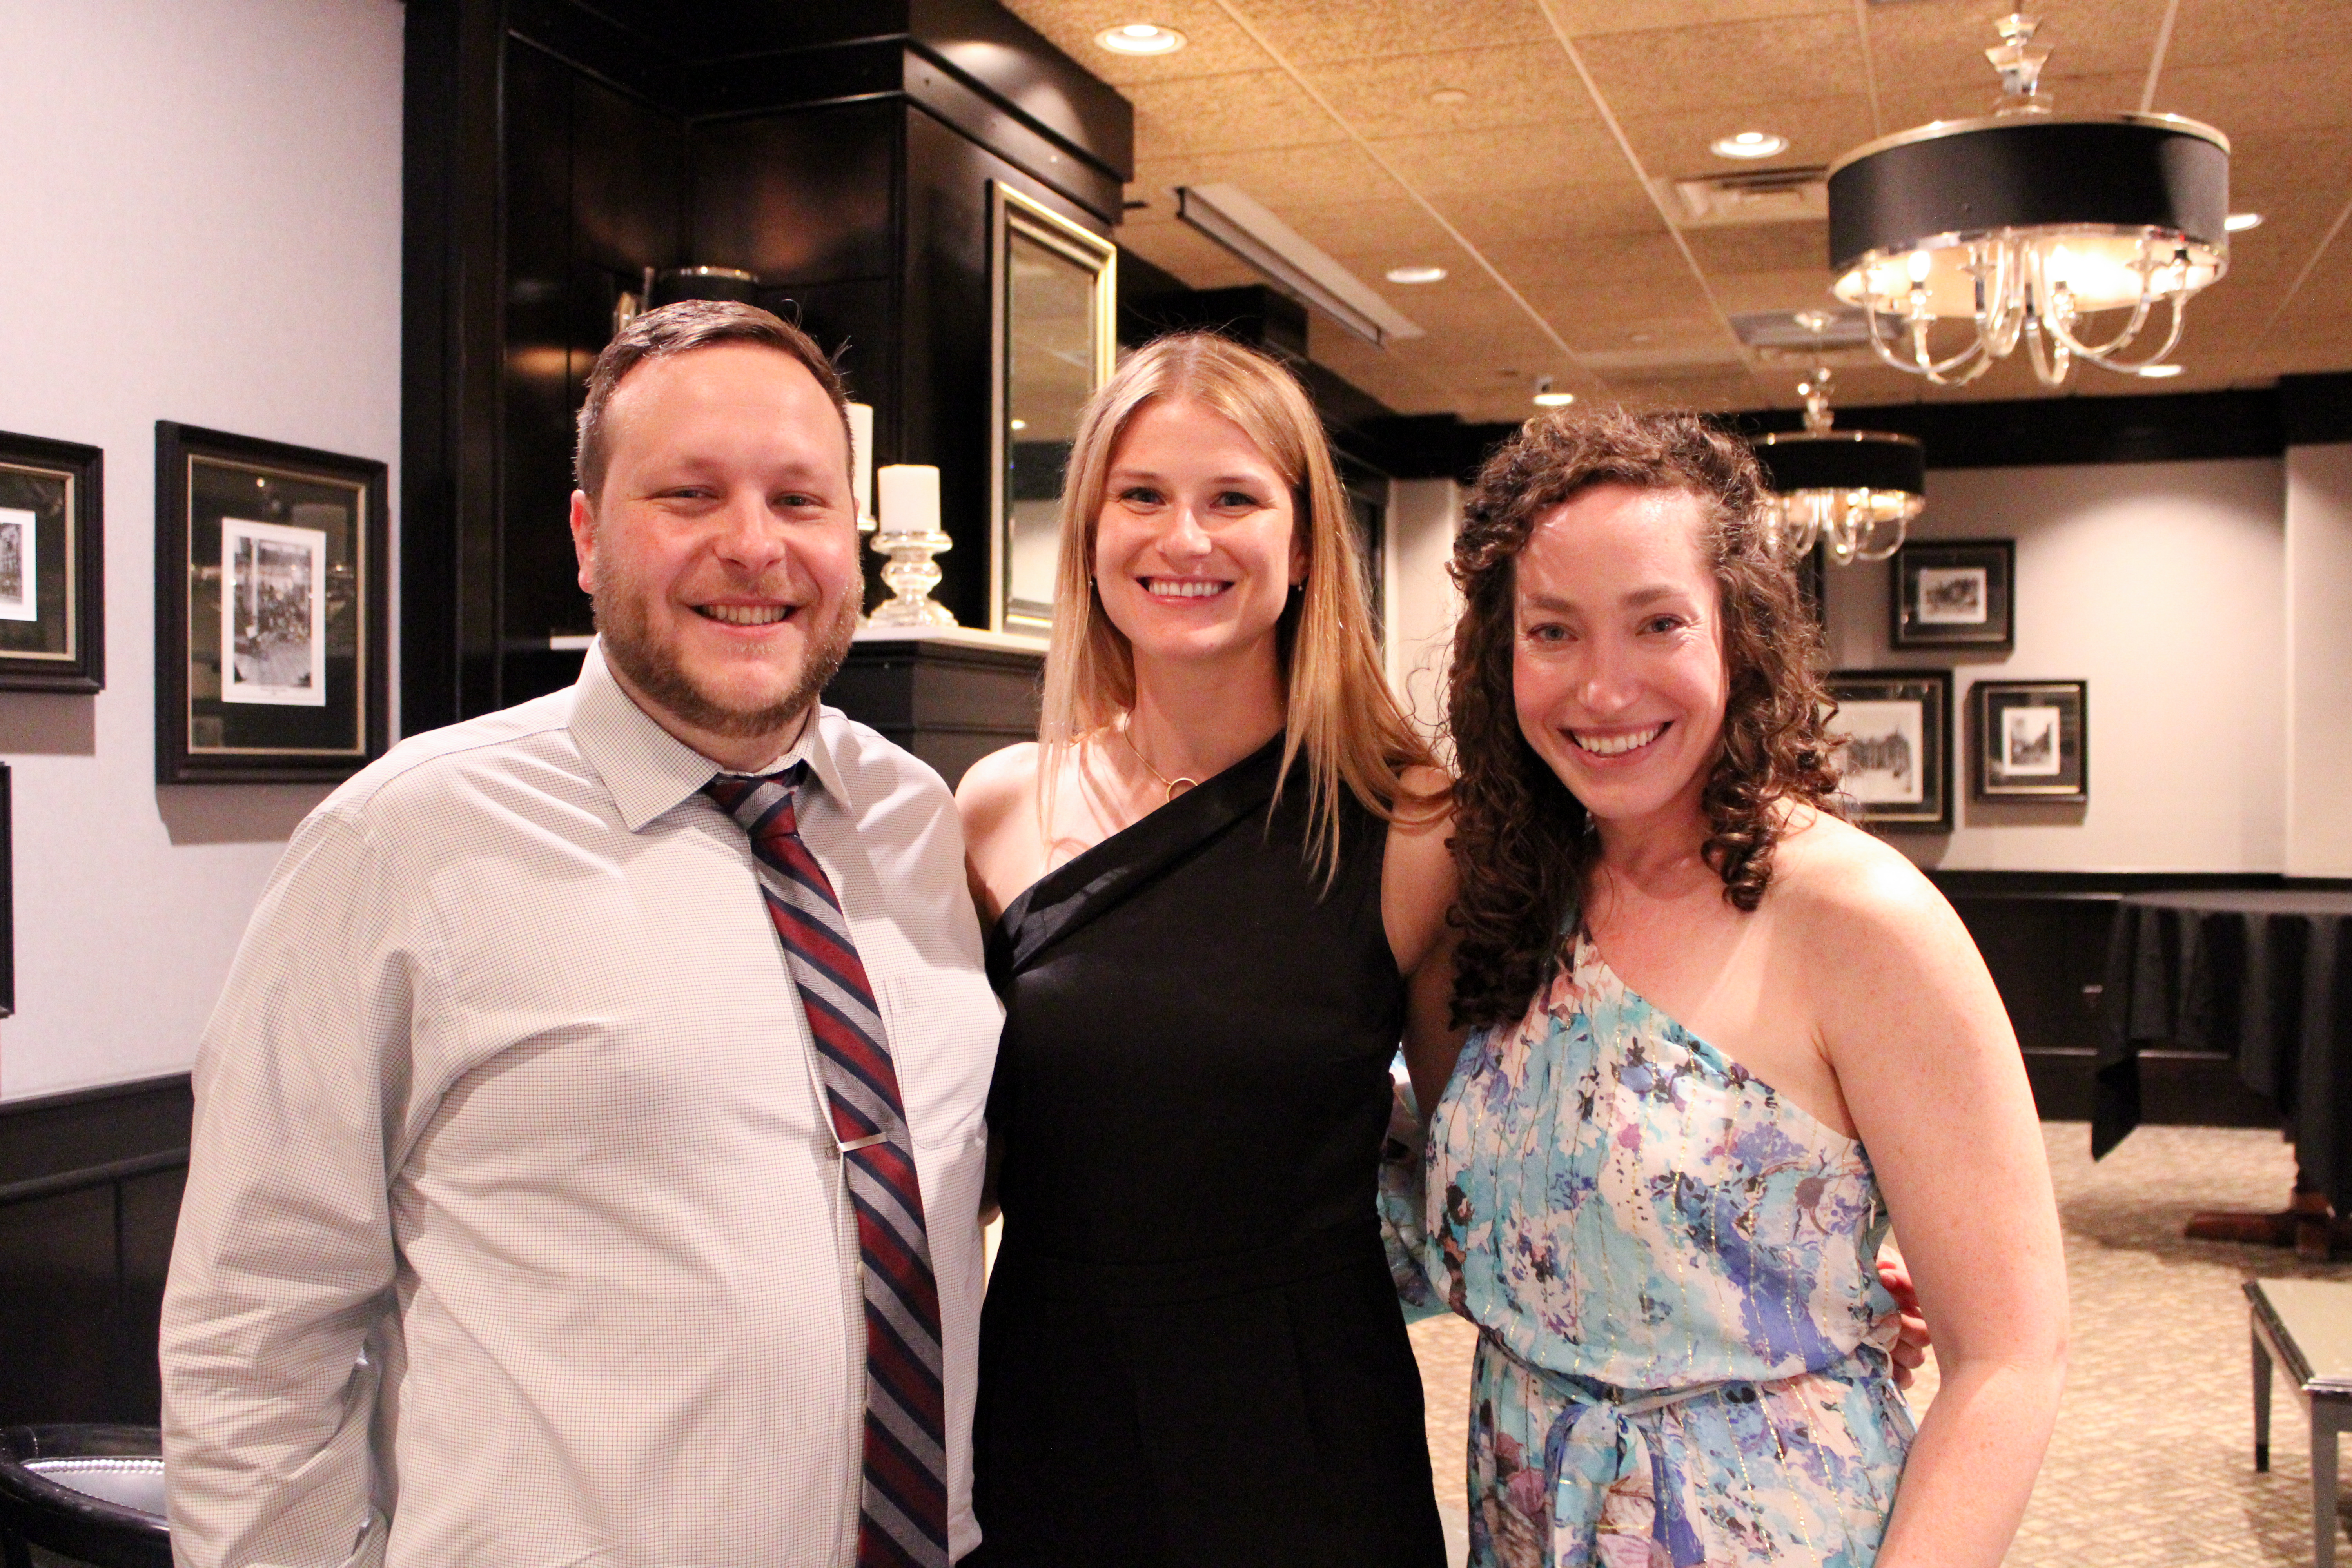 Dr. Chris Rayle, Dr. Robin Pappal, and Dr. Kaitlin July O'Brien